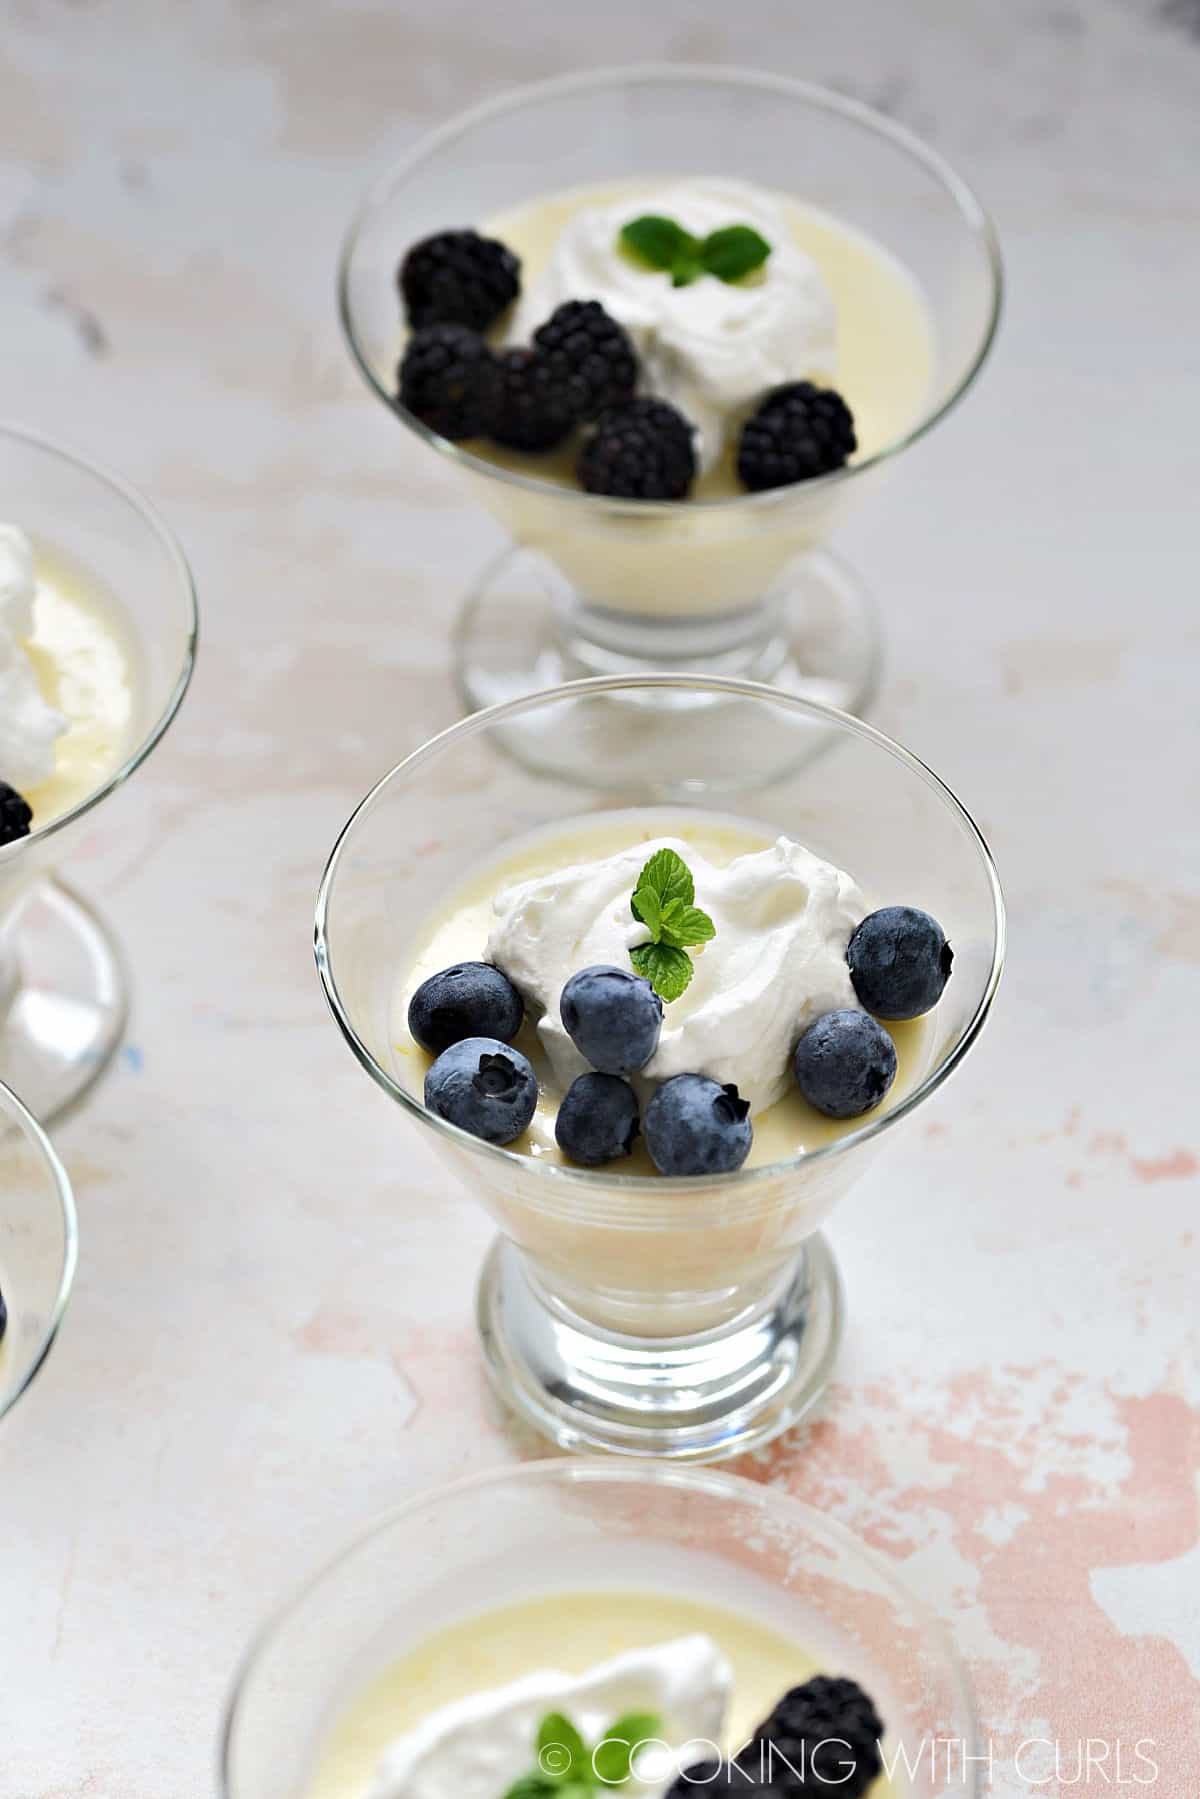 Four clear dessert glasses filled with lemon custard and topped with a dollop of whipped cream and a handful of blueberries.